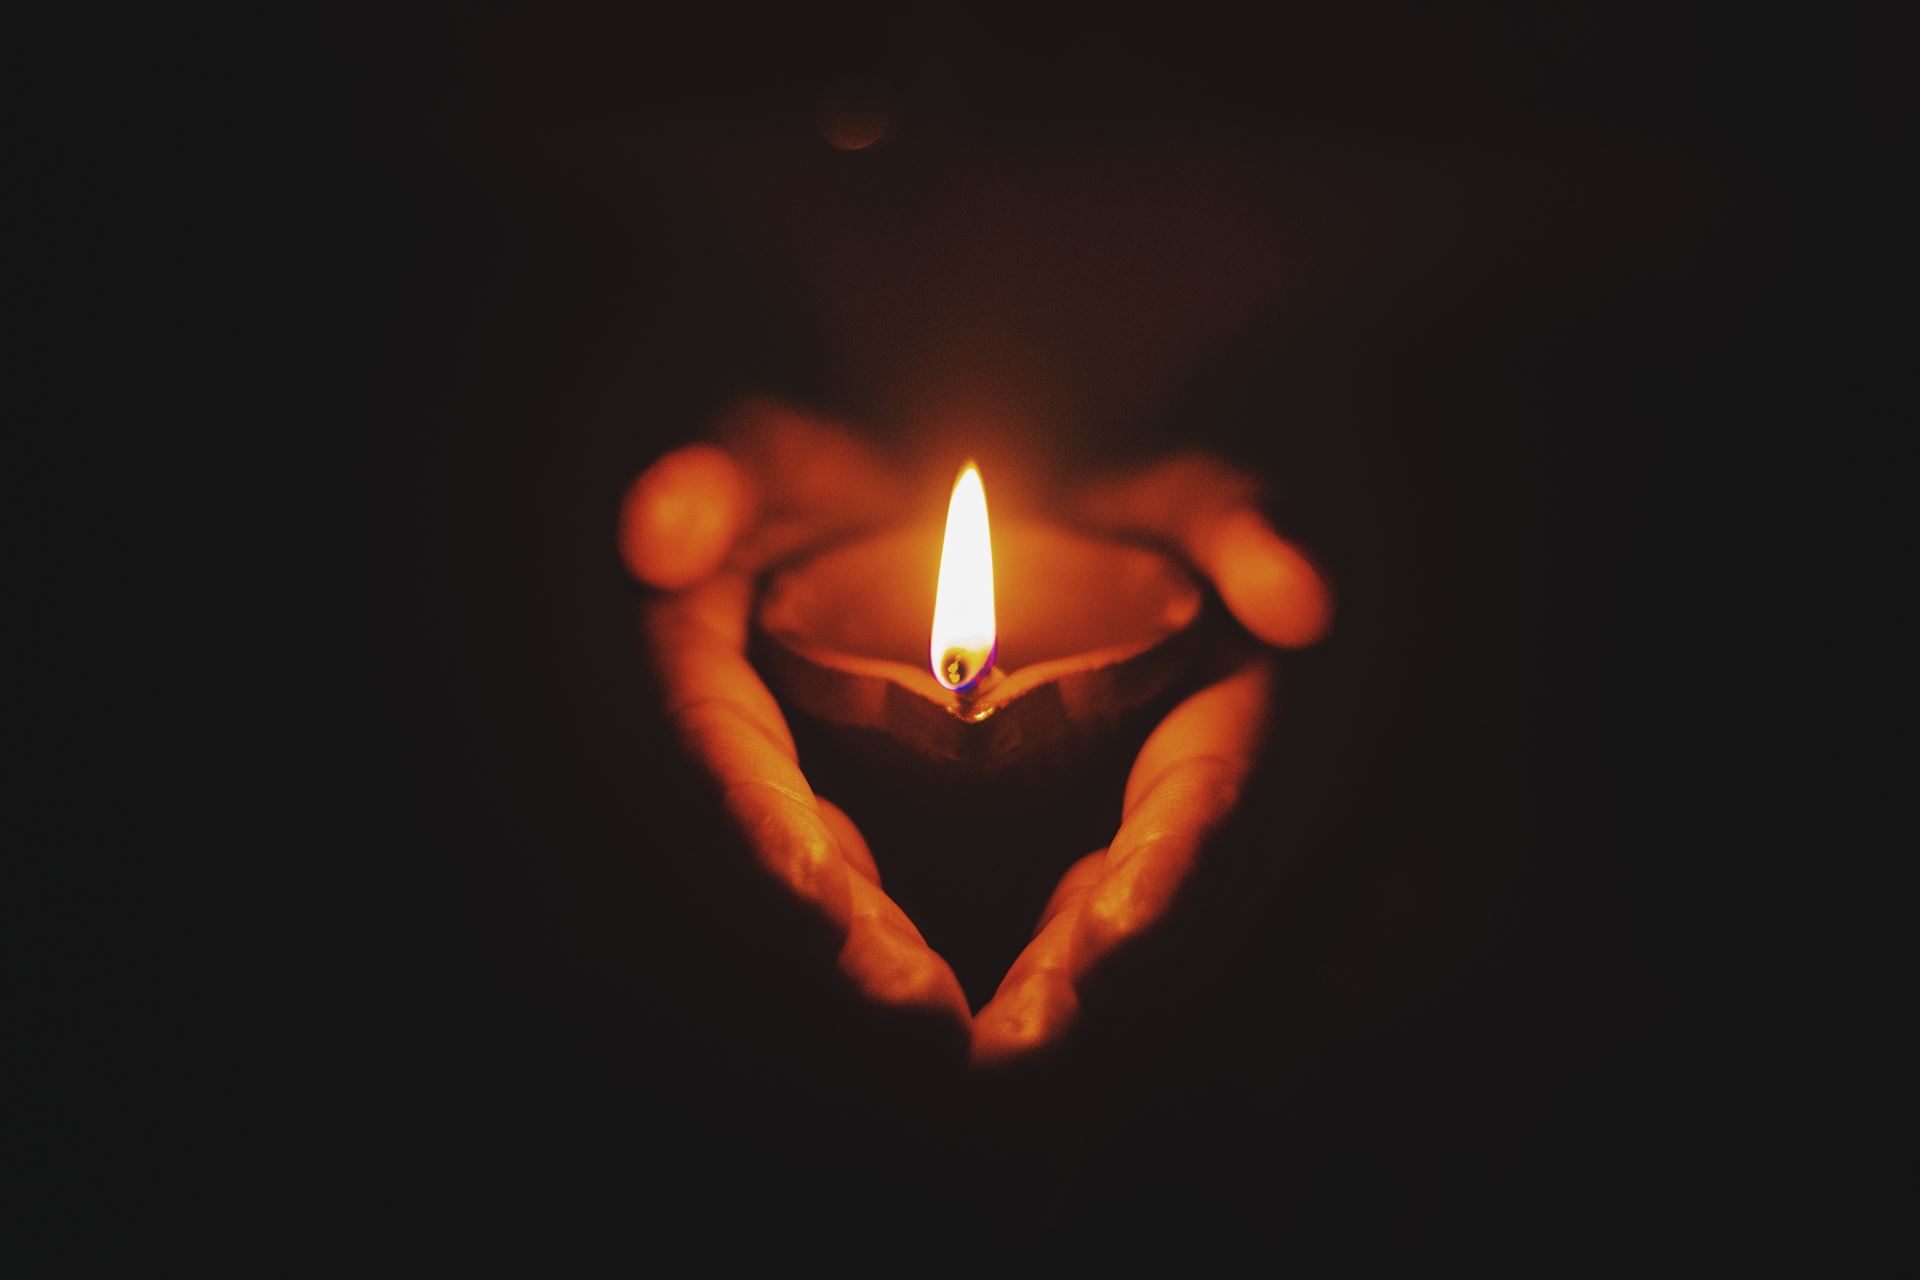 A candle held in cupped hands